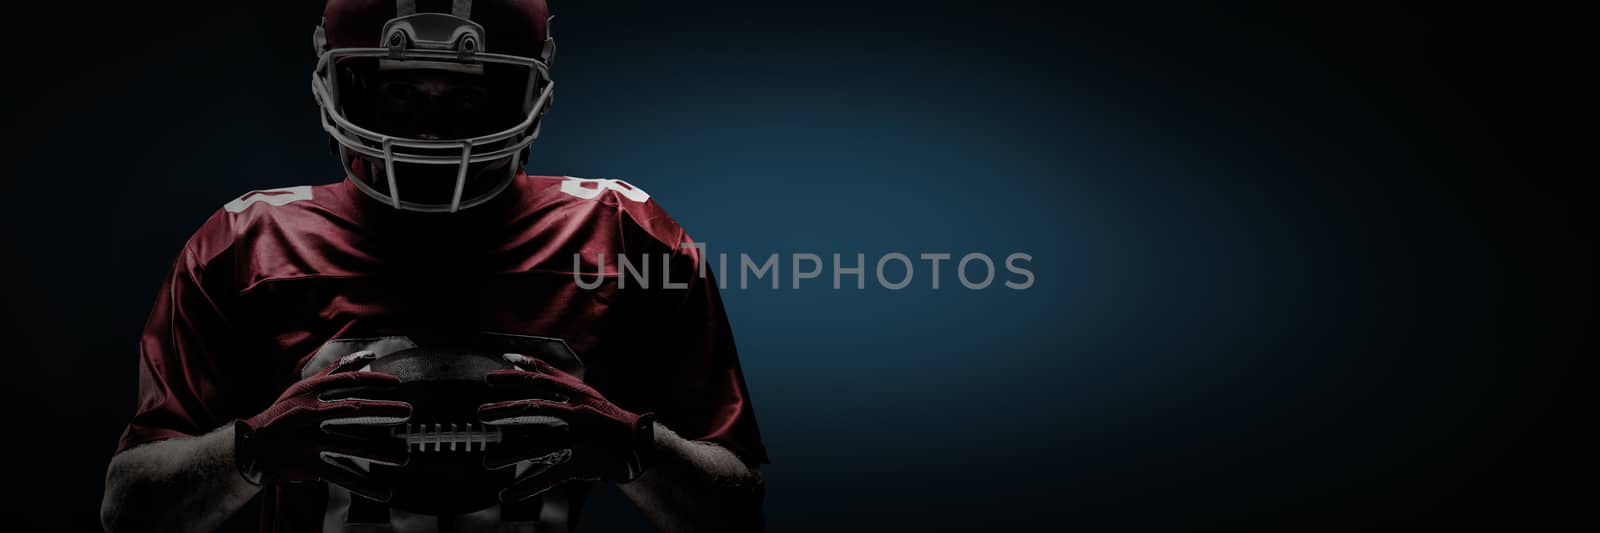 American football player standing in rugby helmet and holding rugby ball against blue background with vignette